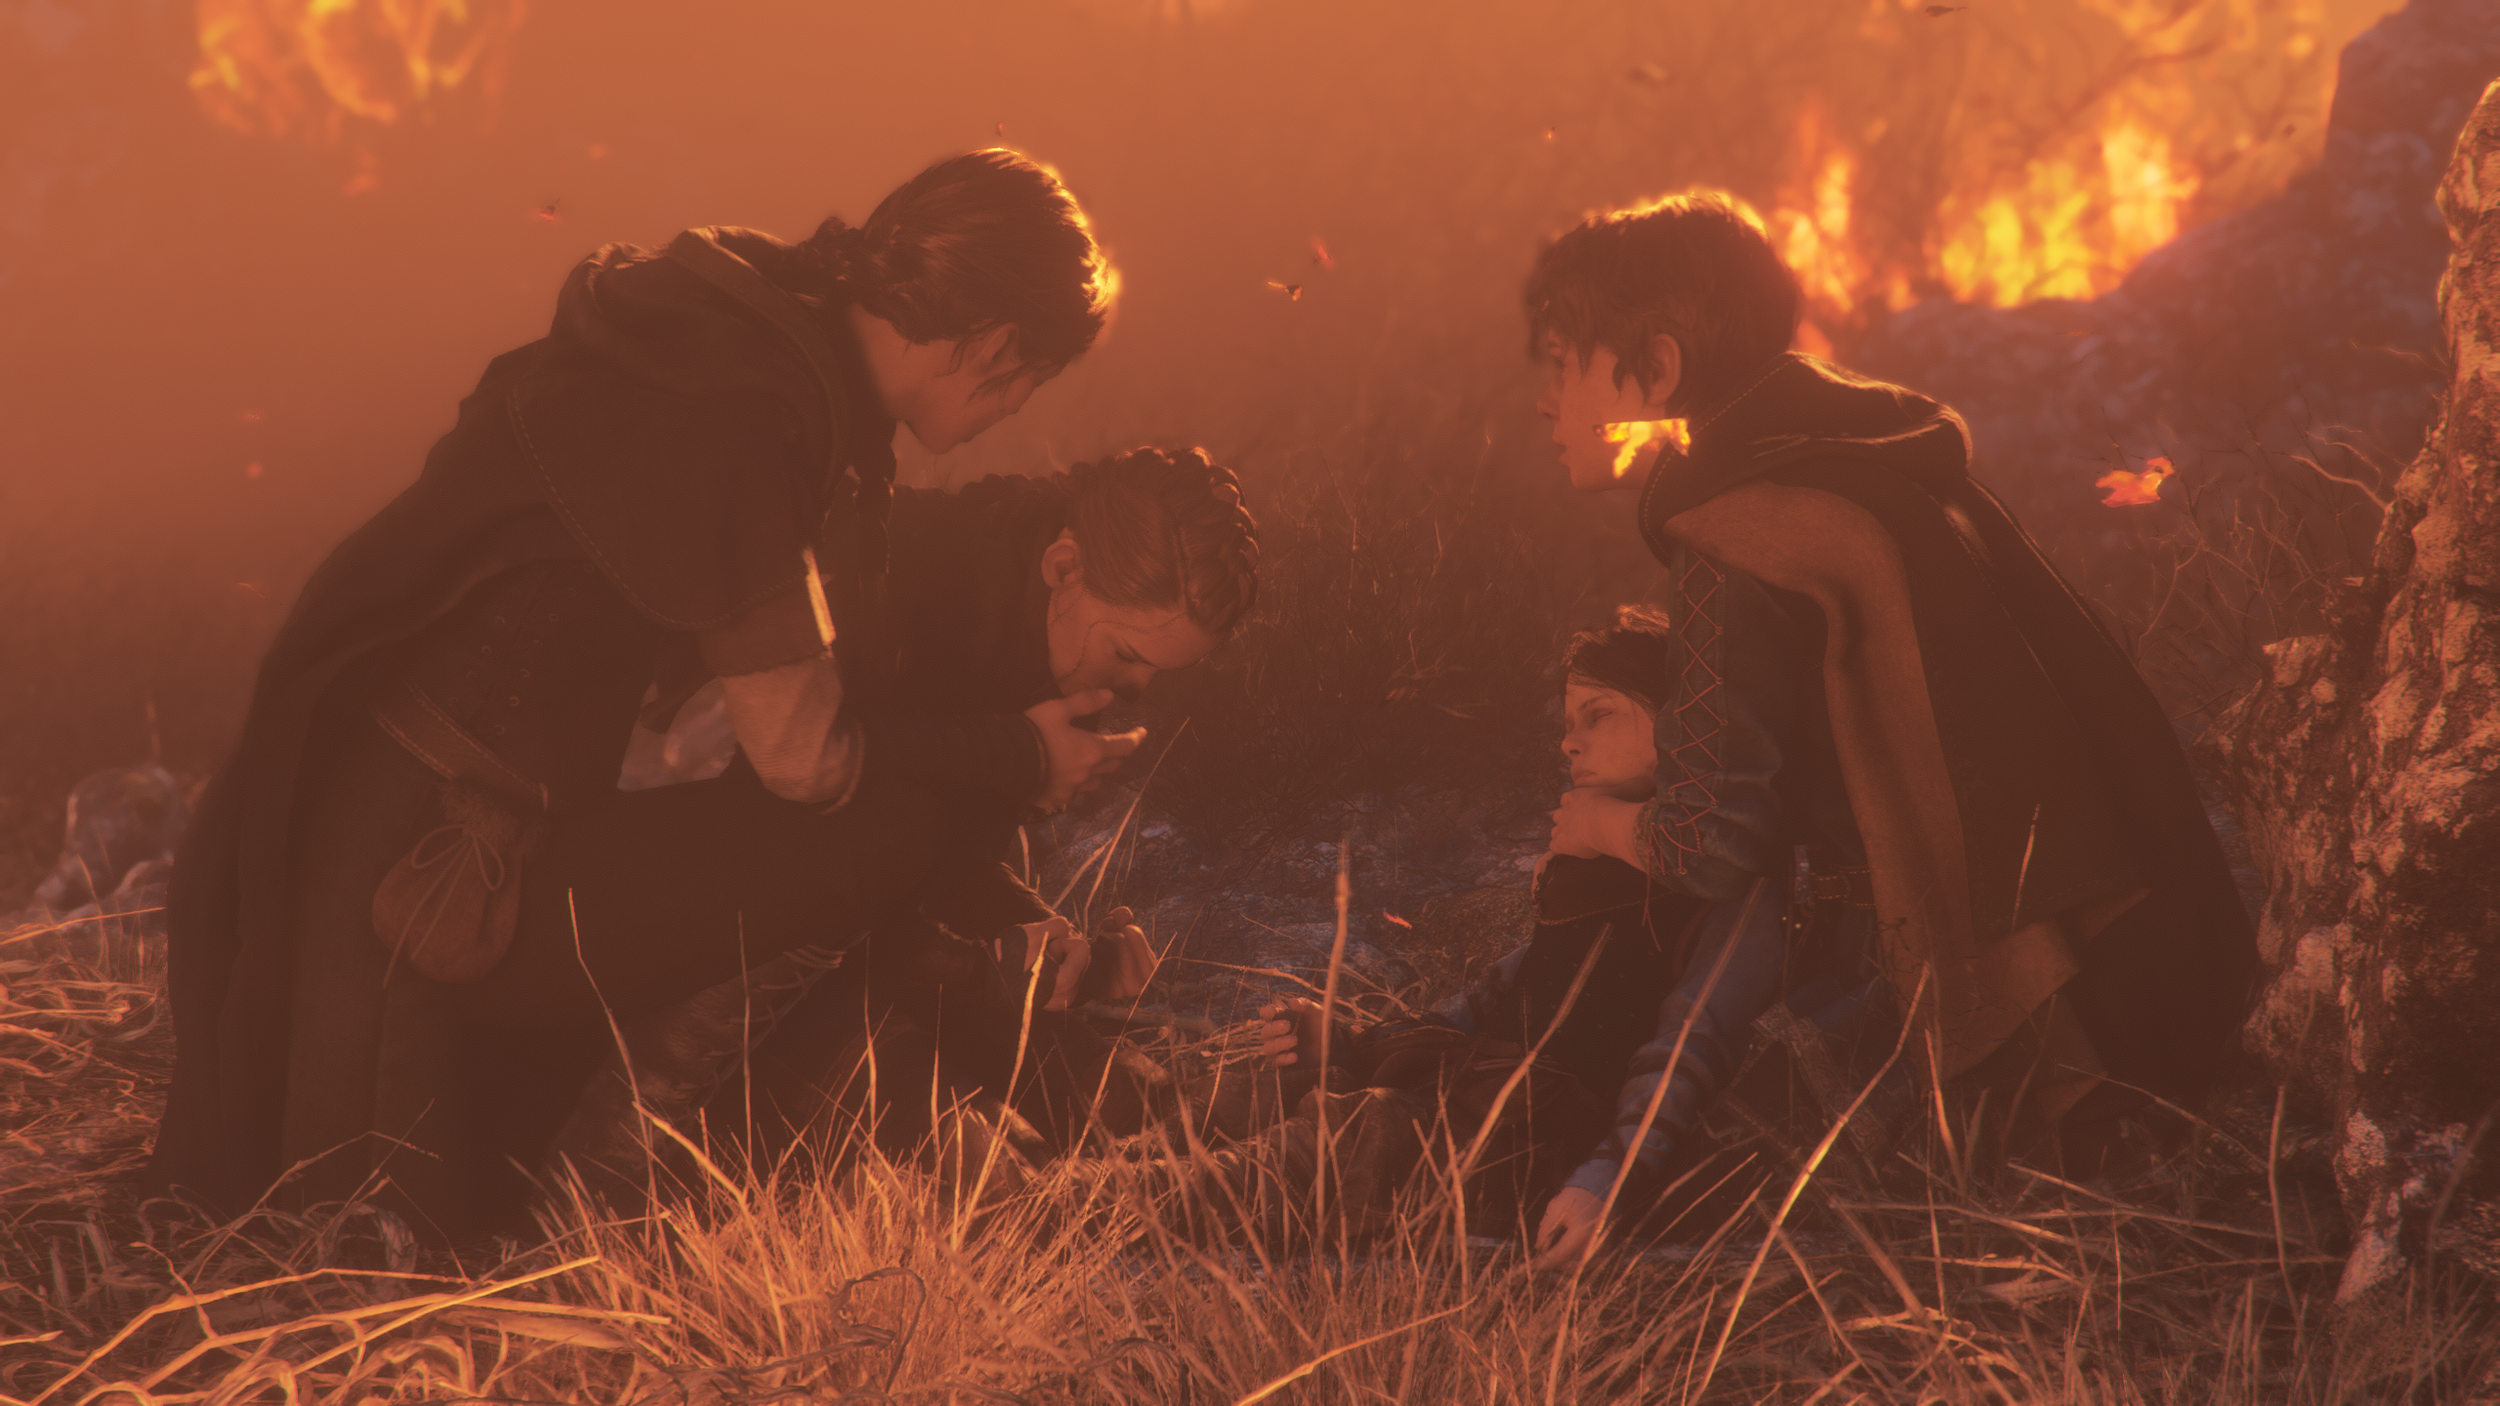 Plague Tale: Innocence] [Screenshot] so many scenes in this game